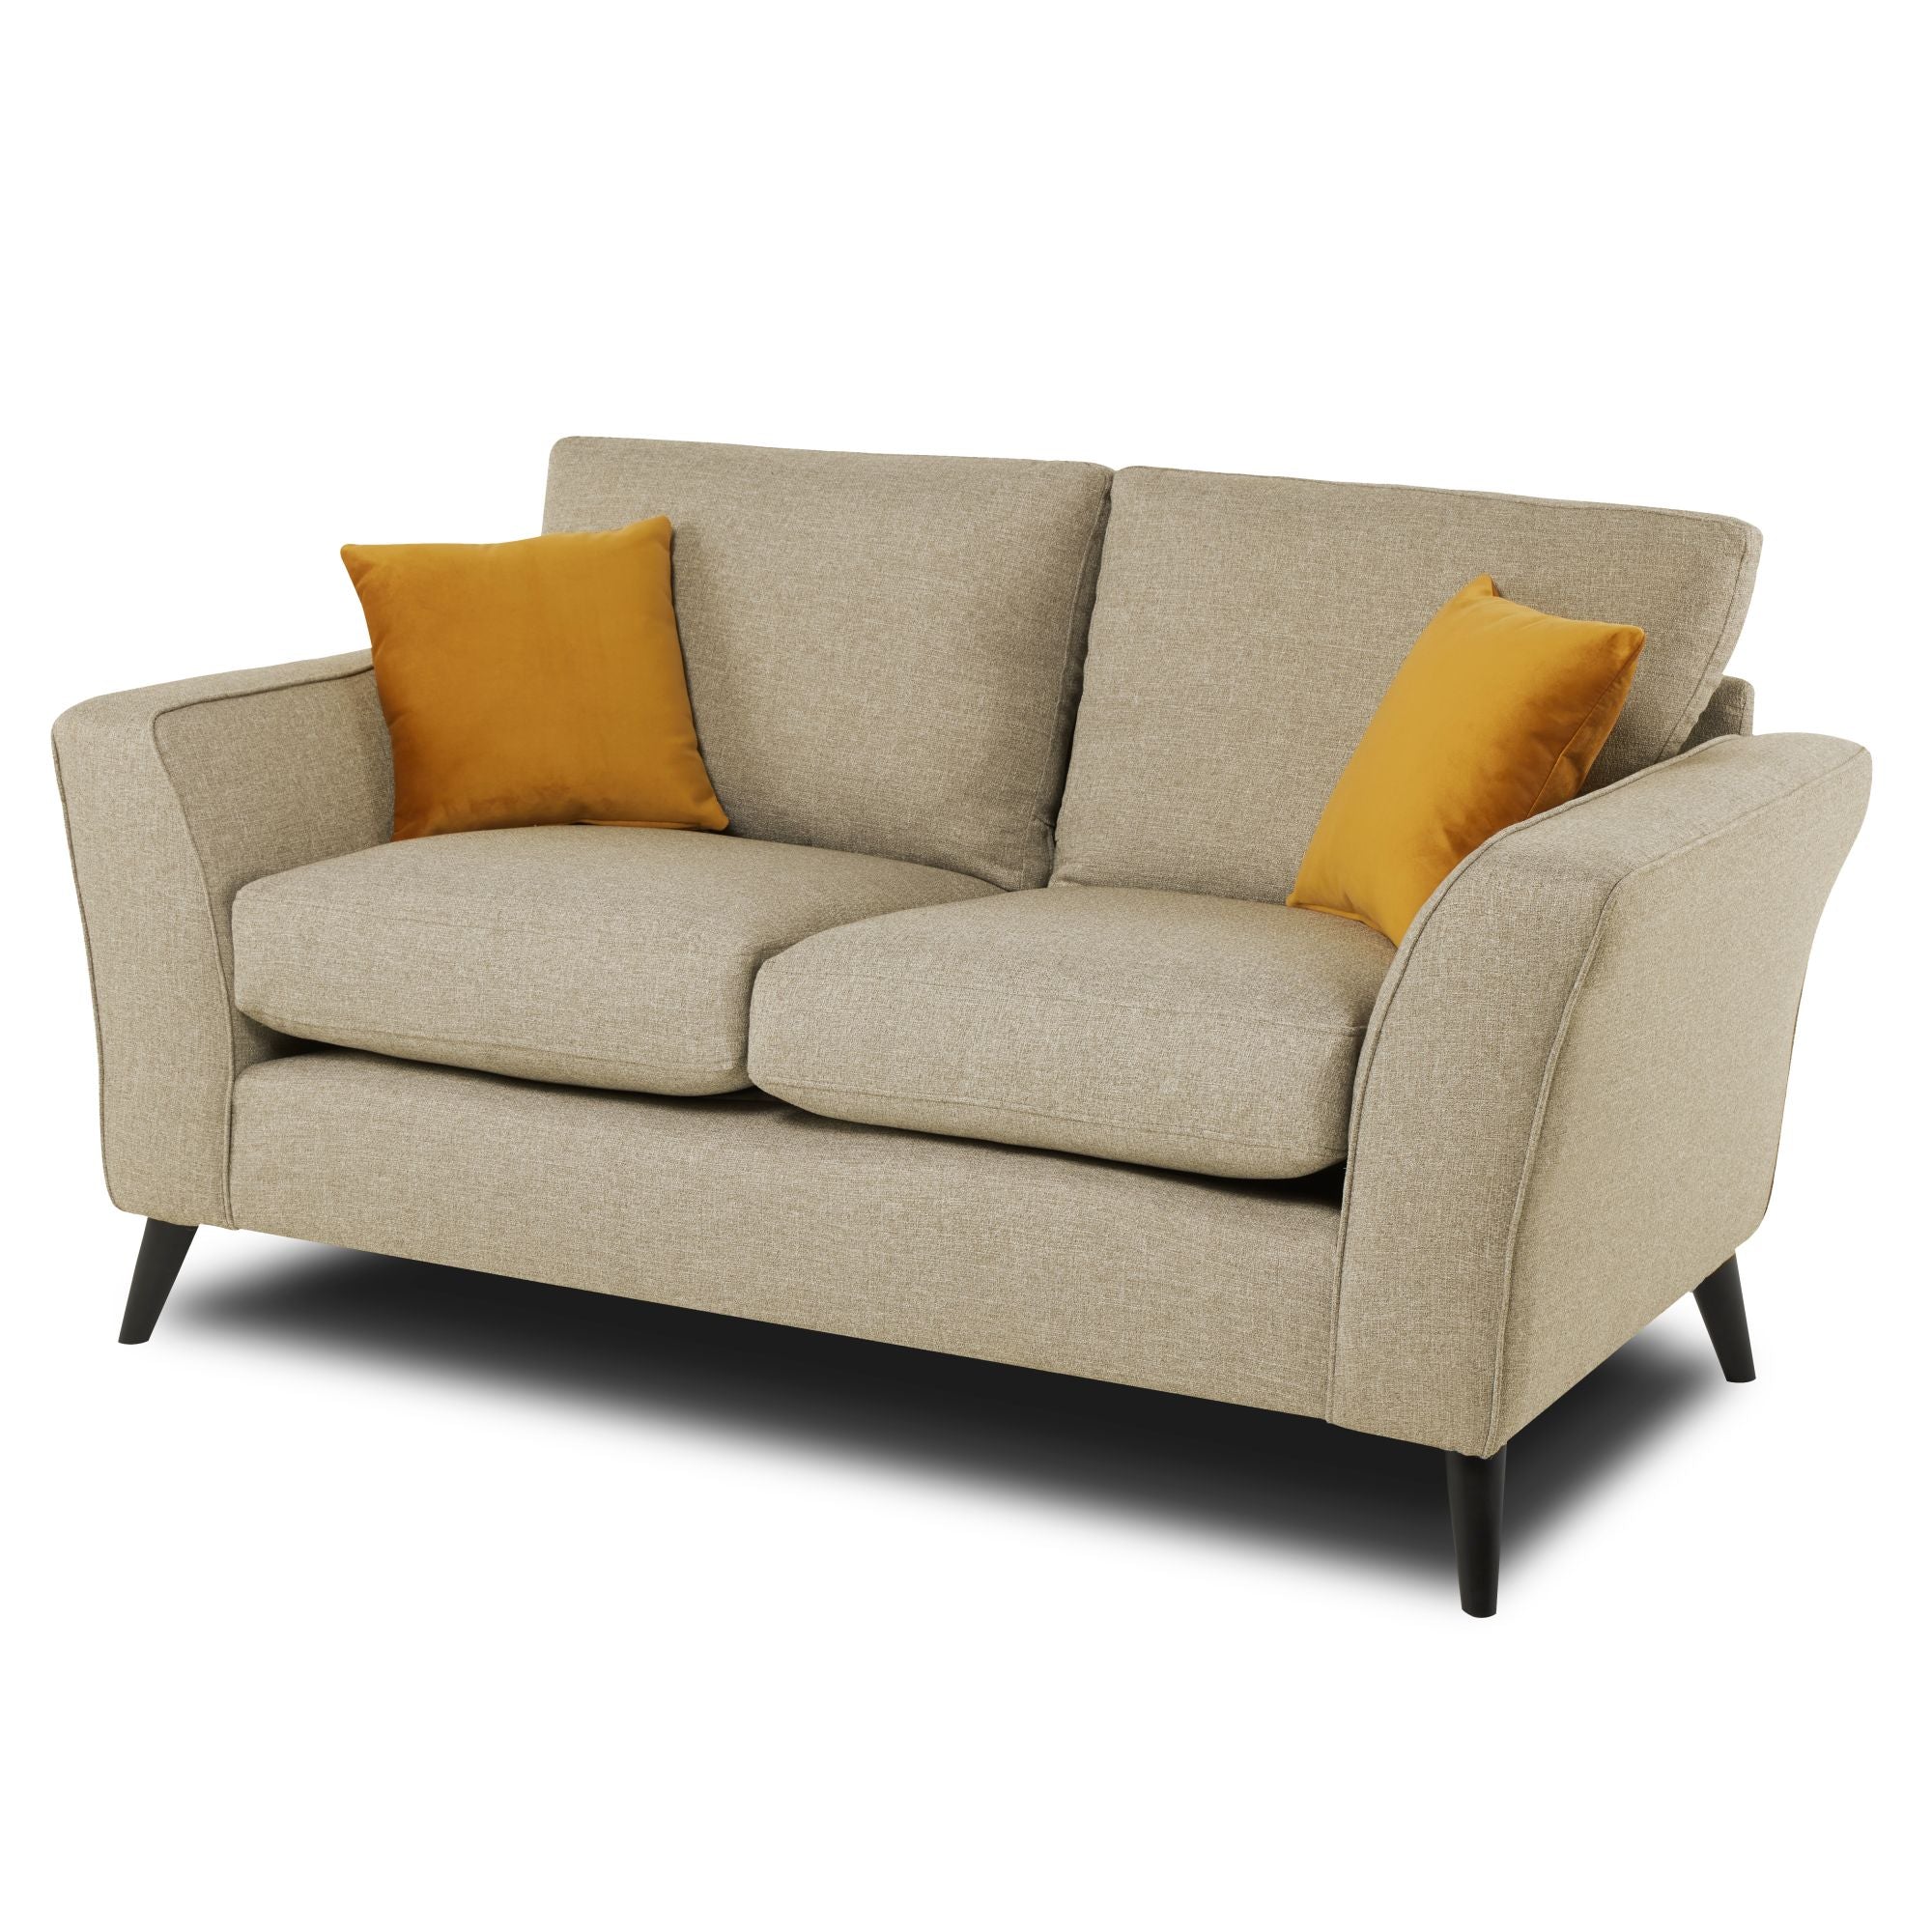 Libby 2 seater sofa in oatmeal shown on an angle with a white background 